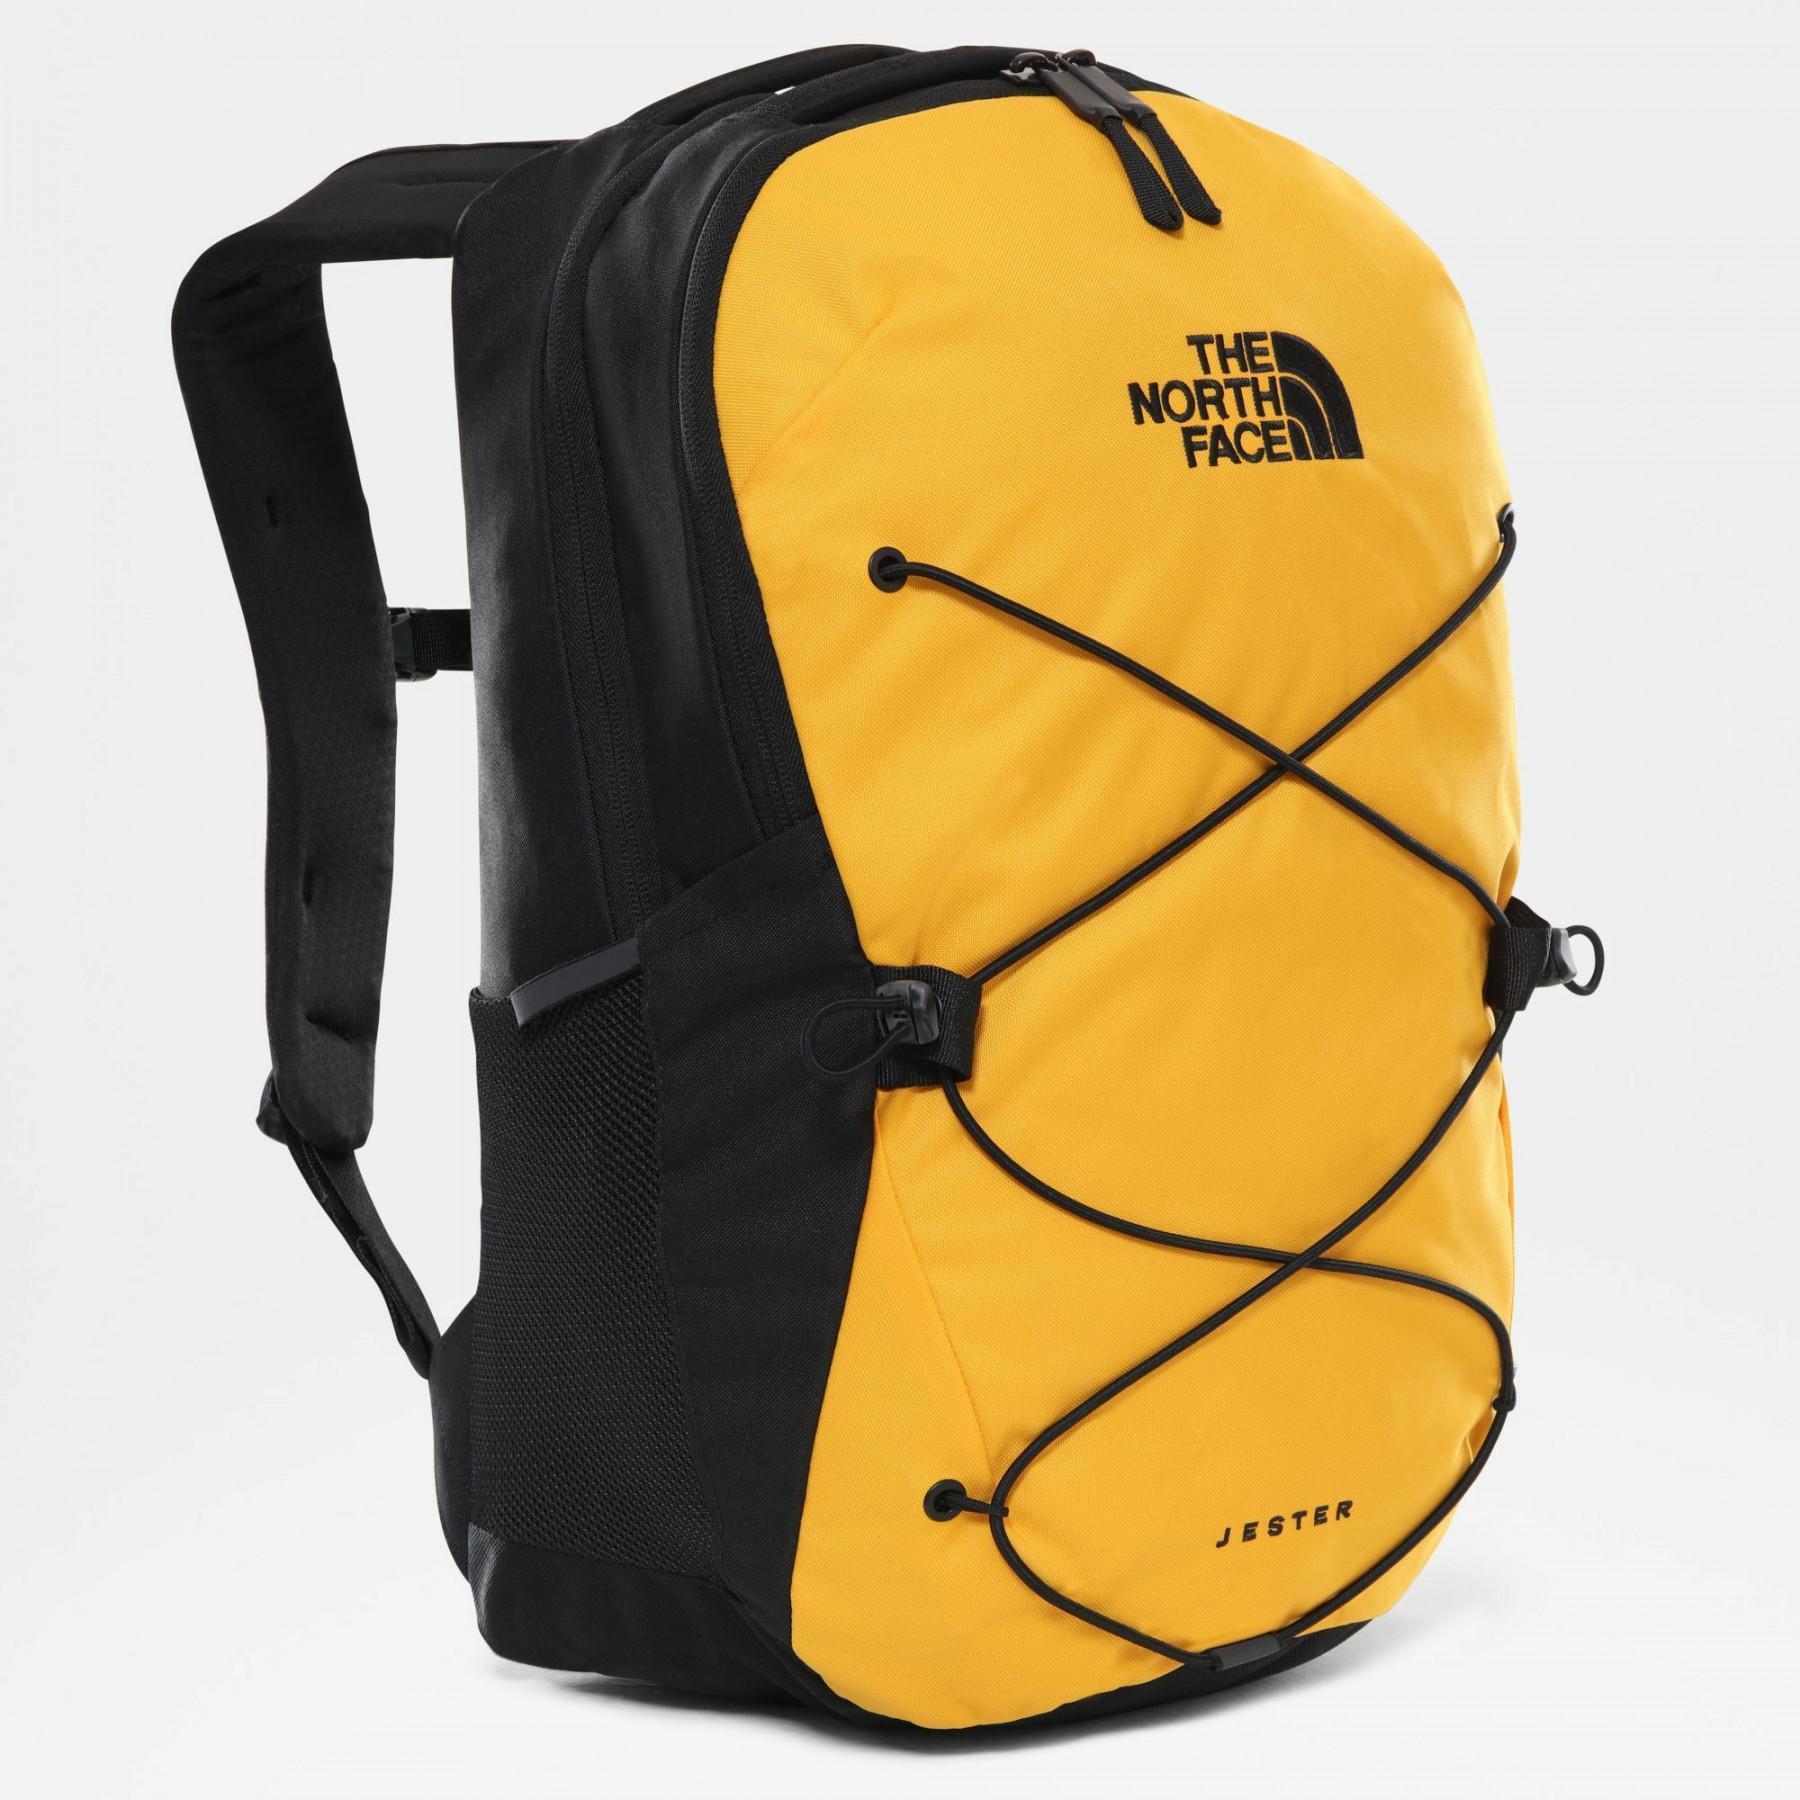 Backpack The North Face Jester - Backpacks - Luggage - Equipment